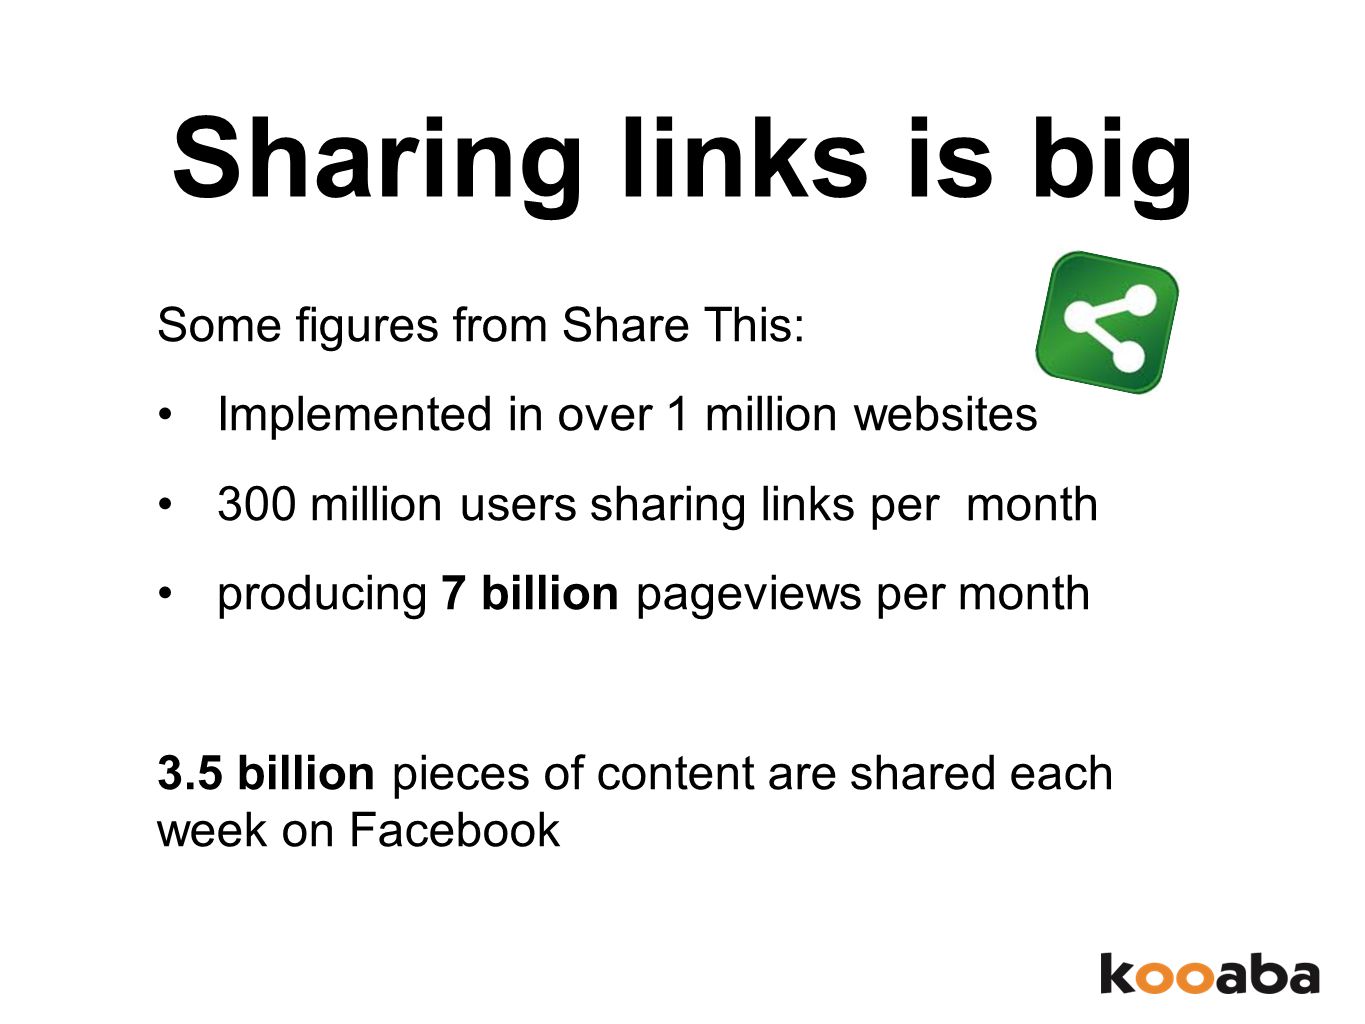 Sharing links is big Some figures from Share This: Implemented in over 1 million websites 300 million users sharing links per month producing 7 billion pageviews per month 3.5 billion pieces of content are shared each week on Facebook